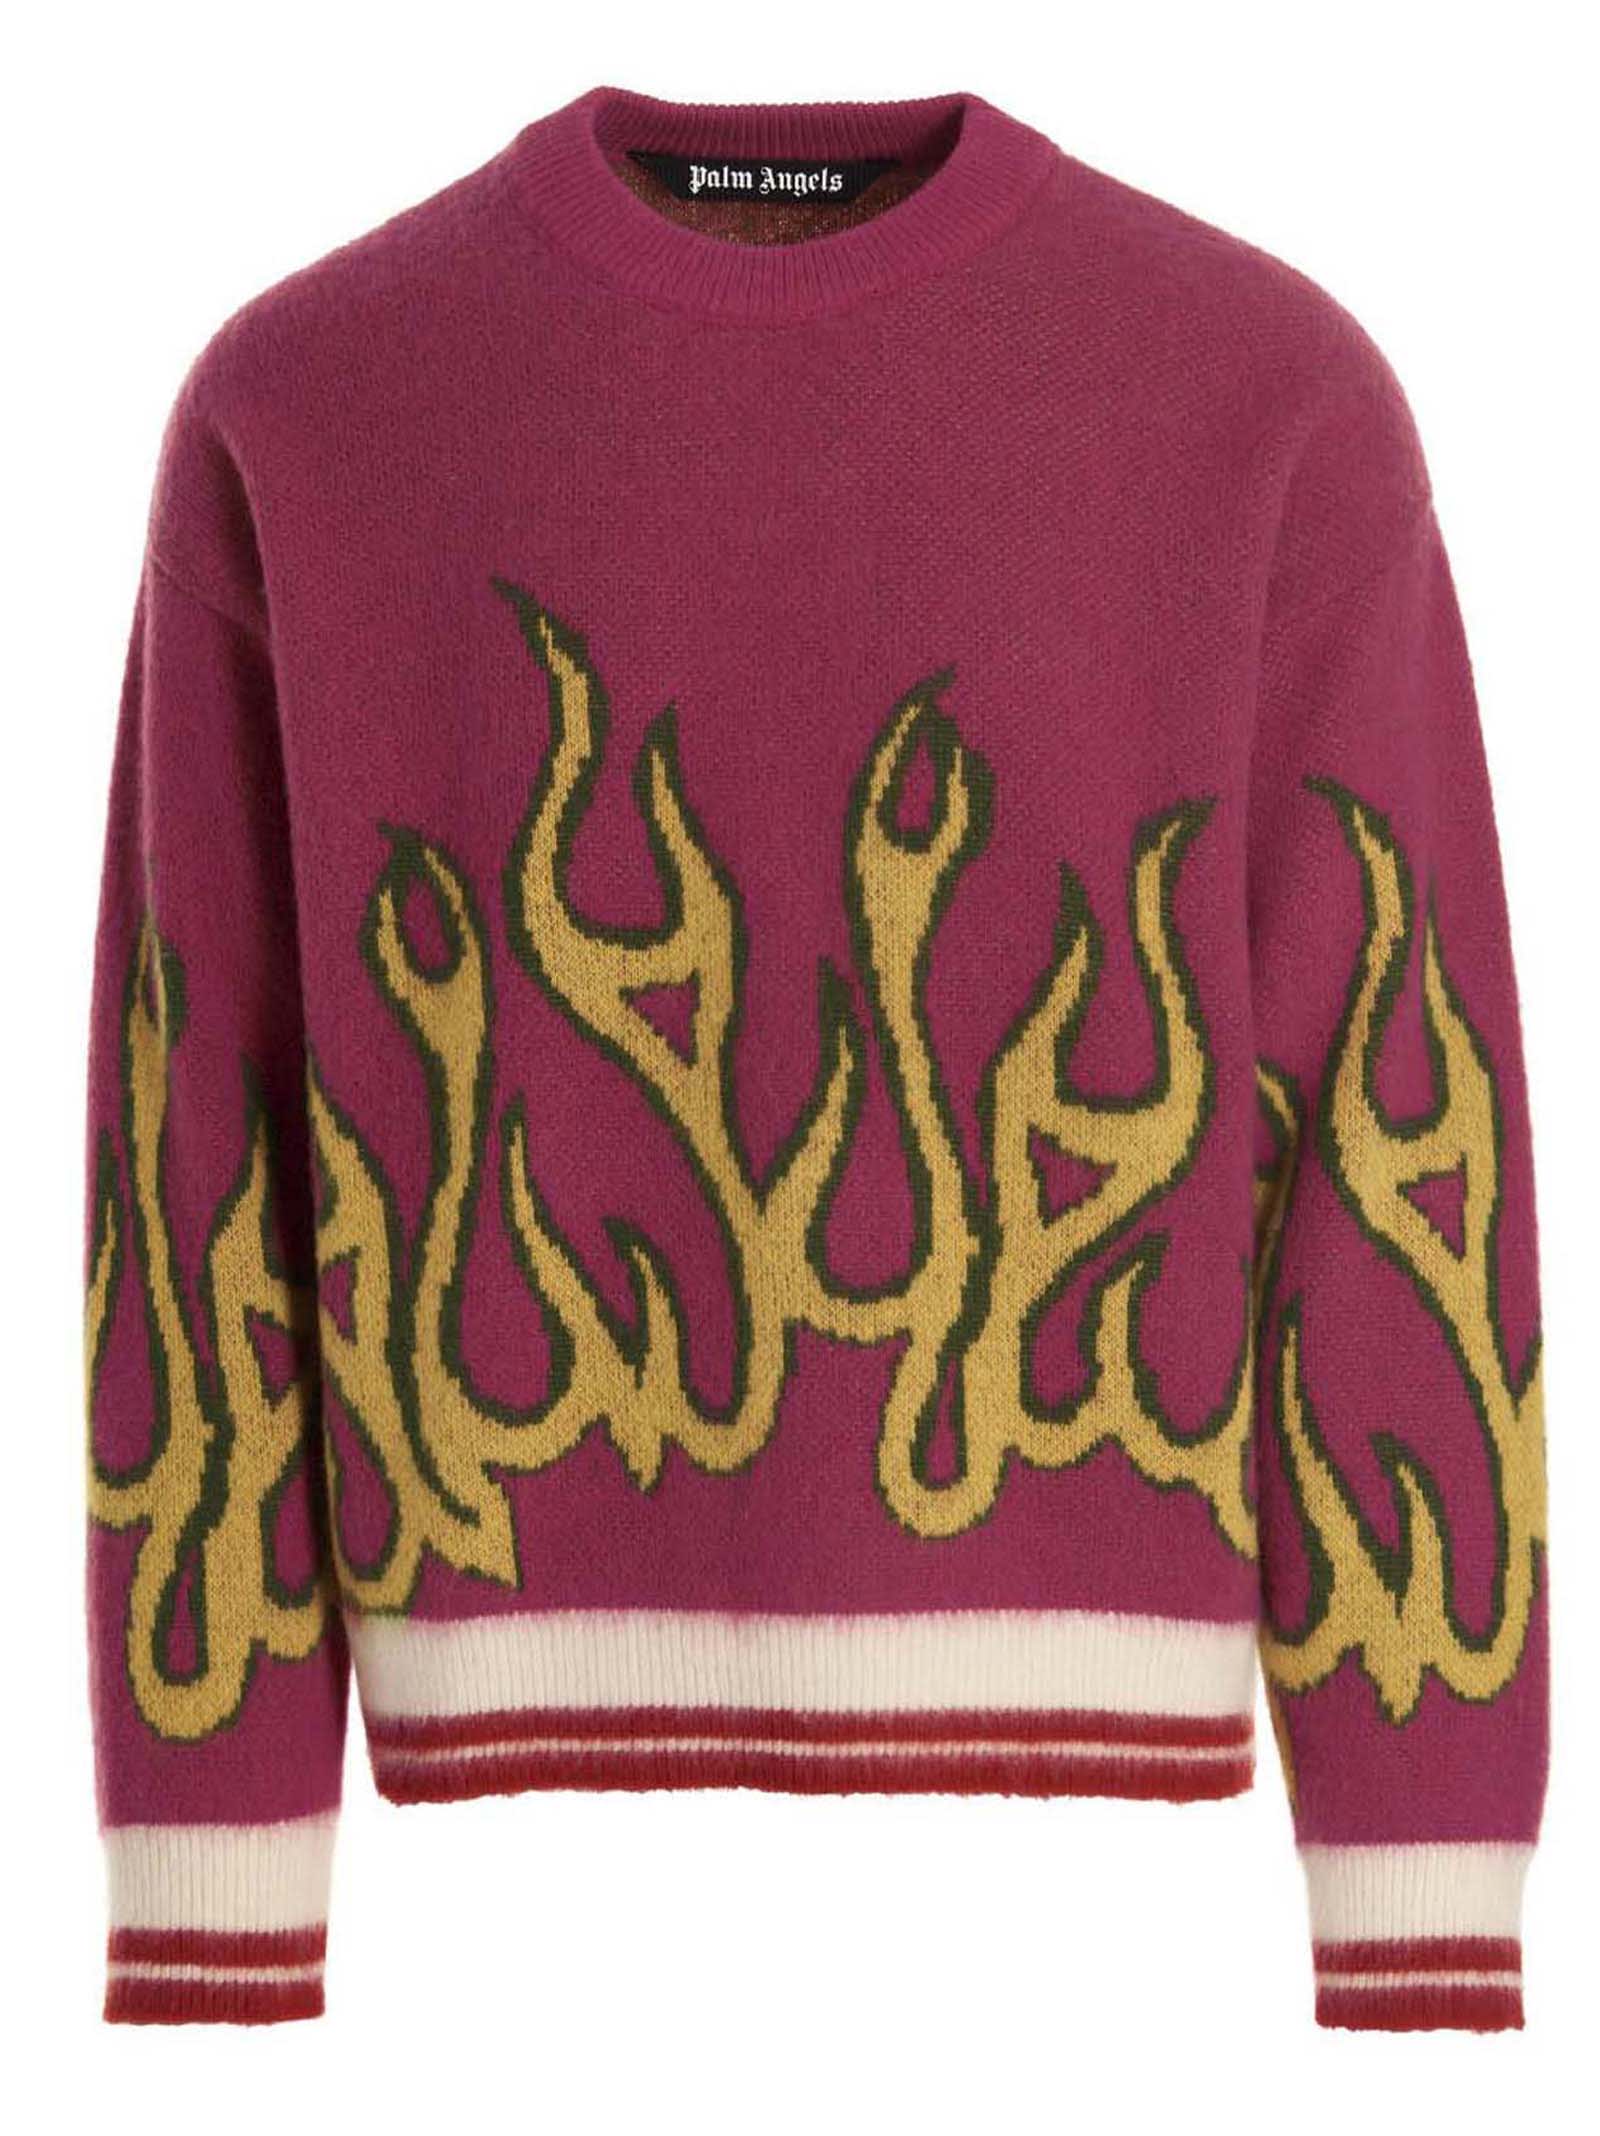 Palm Angels flame Sweater